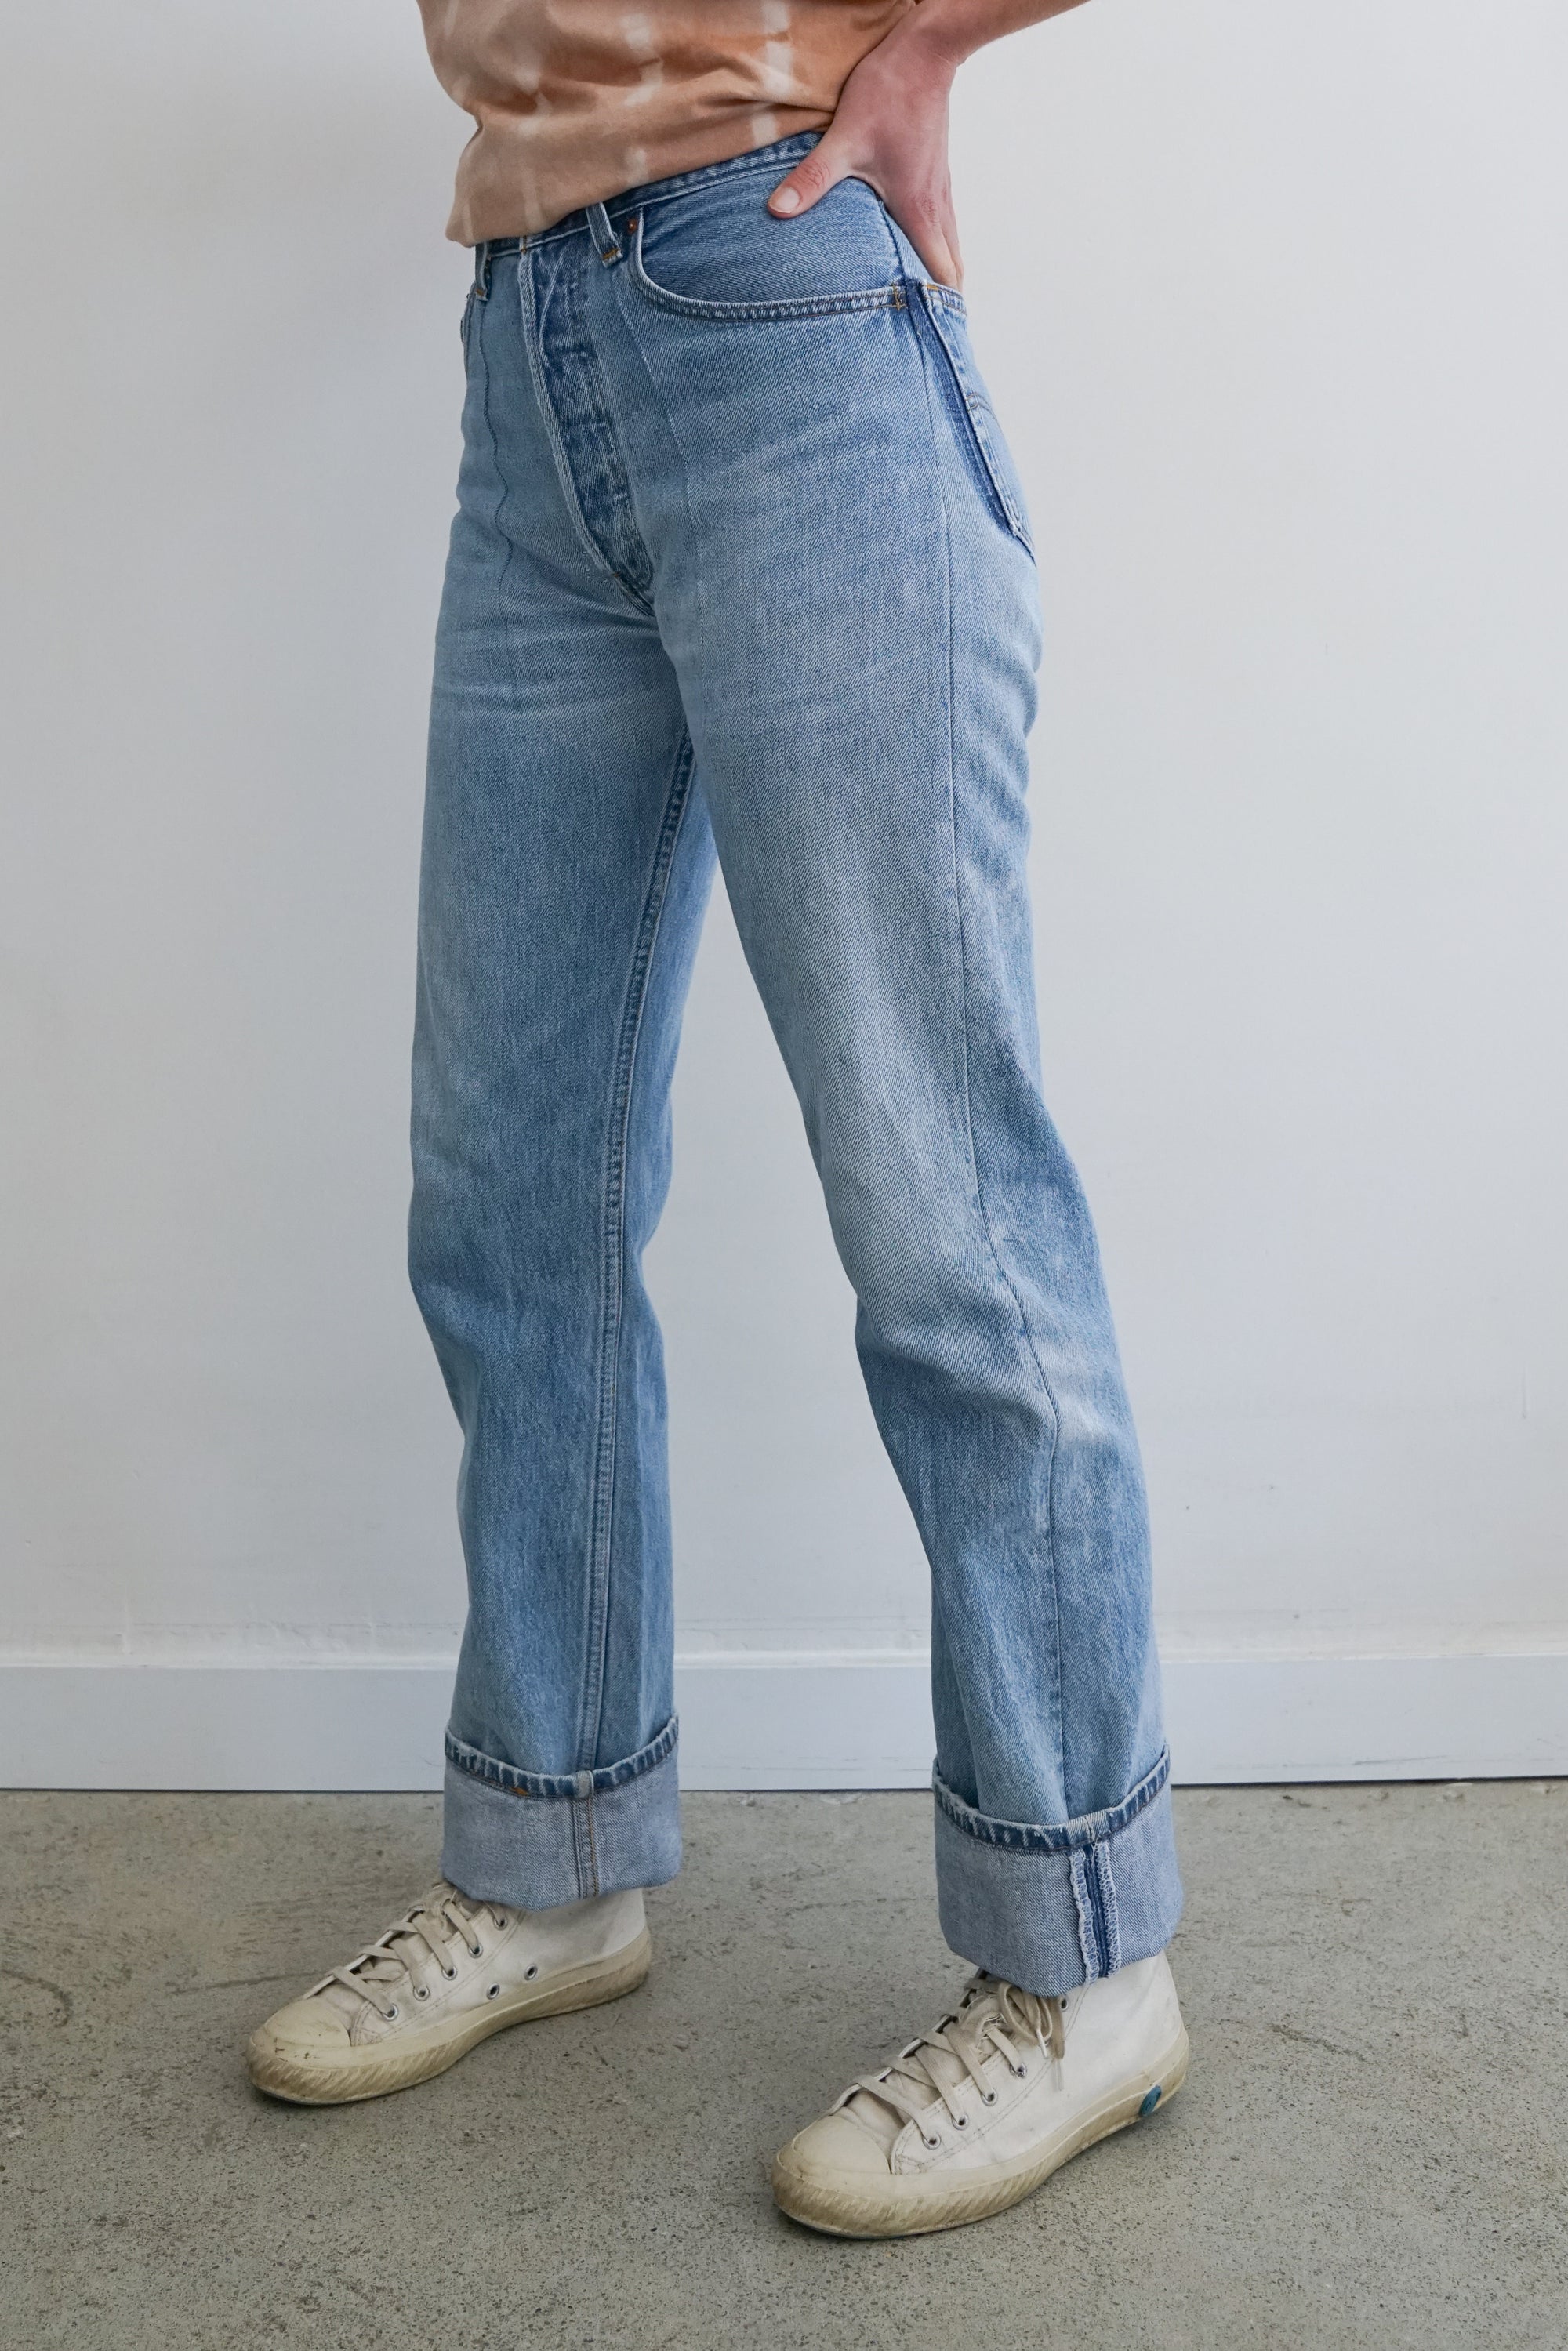 Reworked + Repaired Levis 501 26W